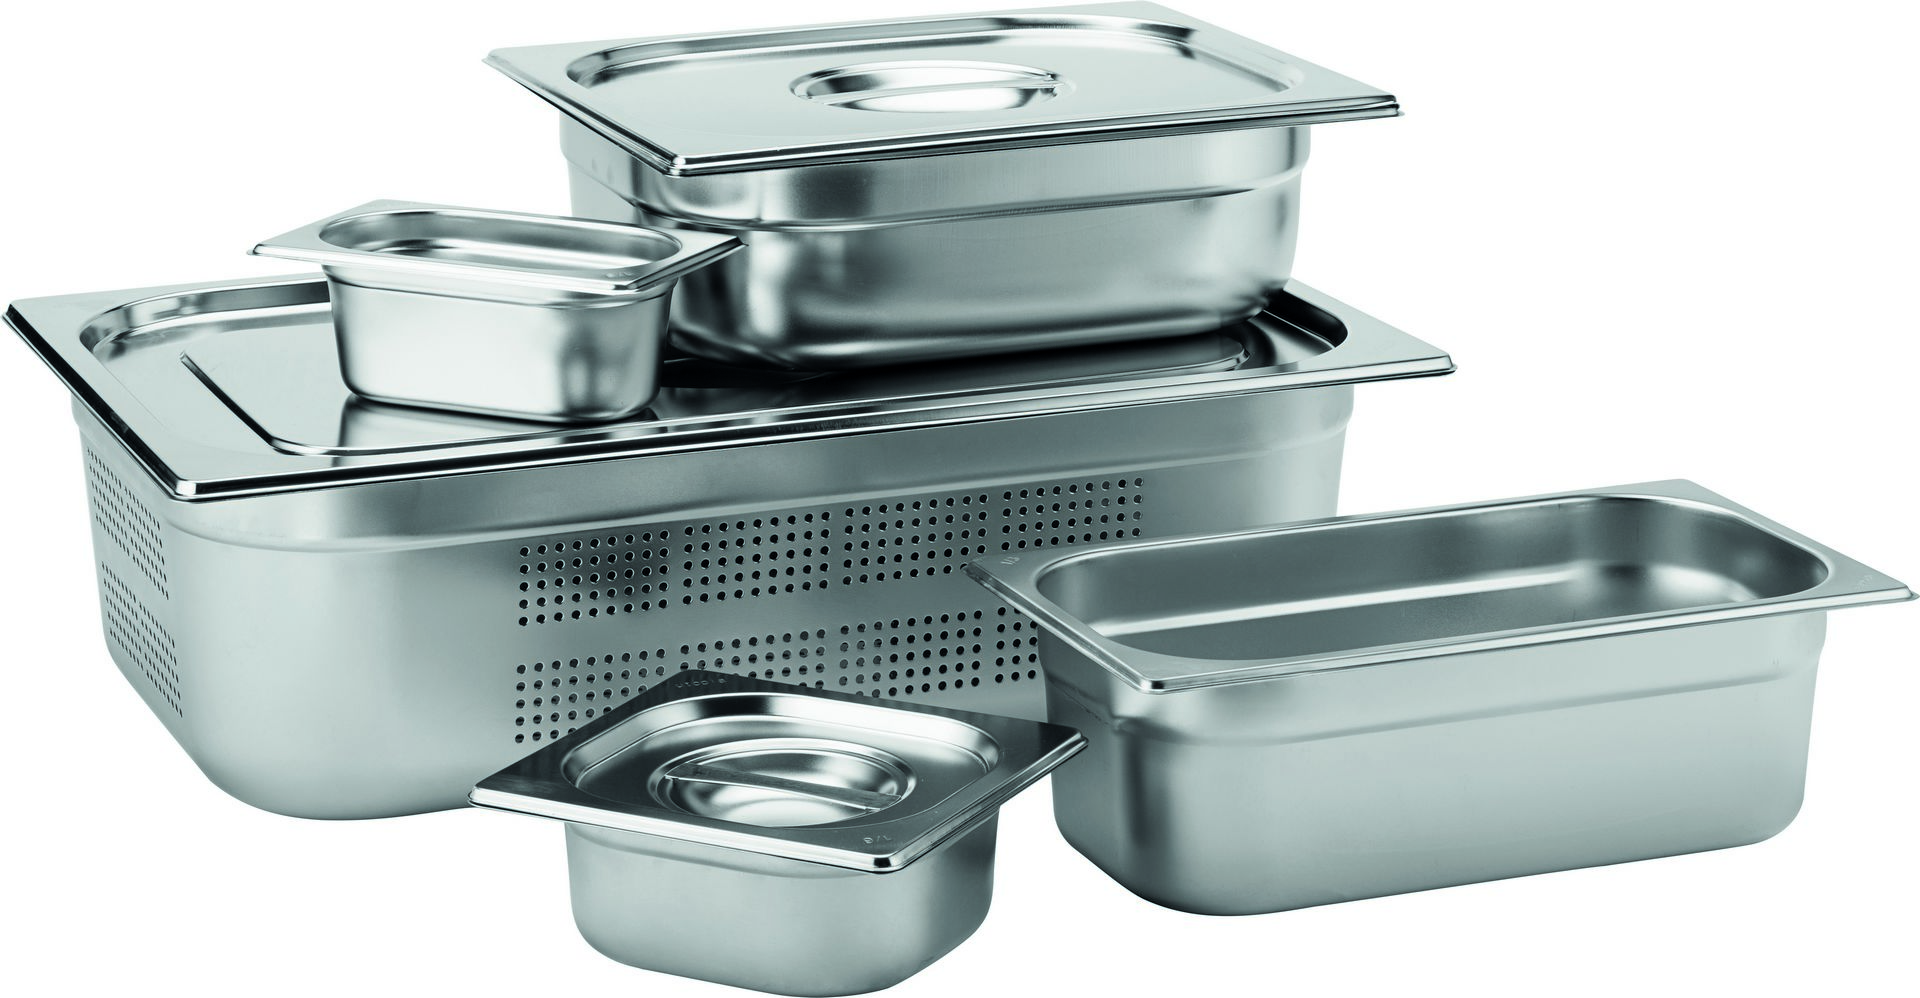 Stainless Steel GN 1/2 Pan 20cm Deep - F70020-000000-B01006 (Pack of 6)